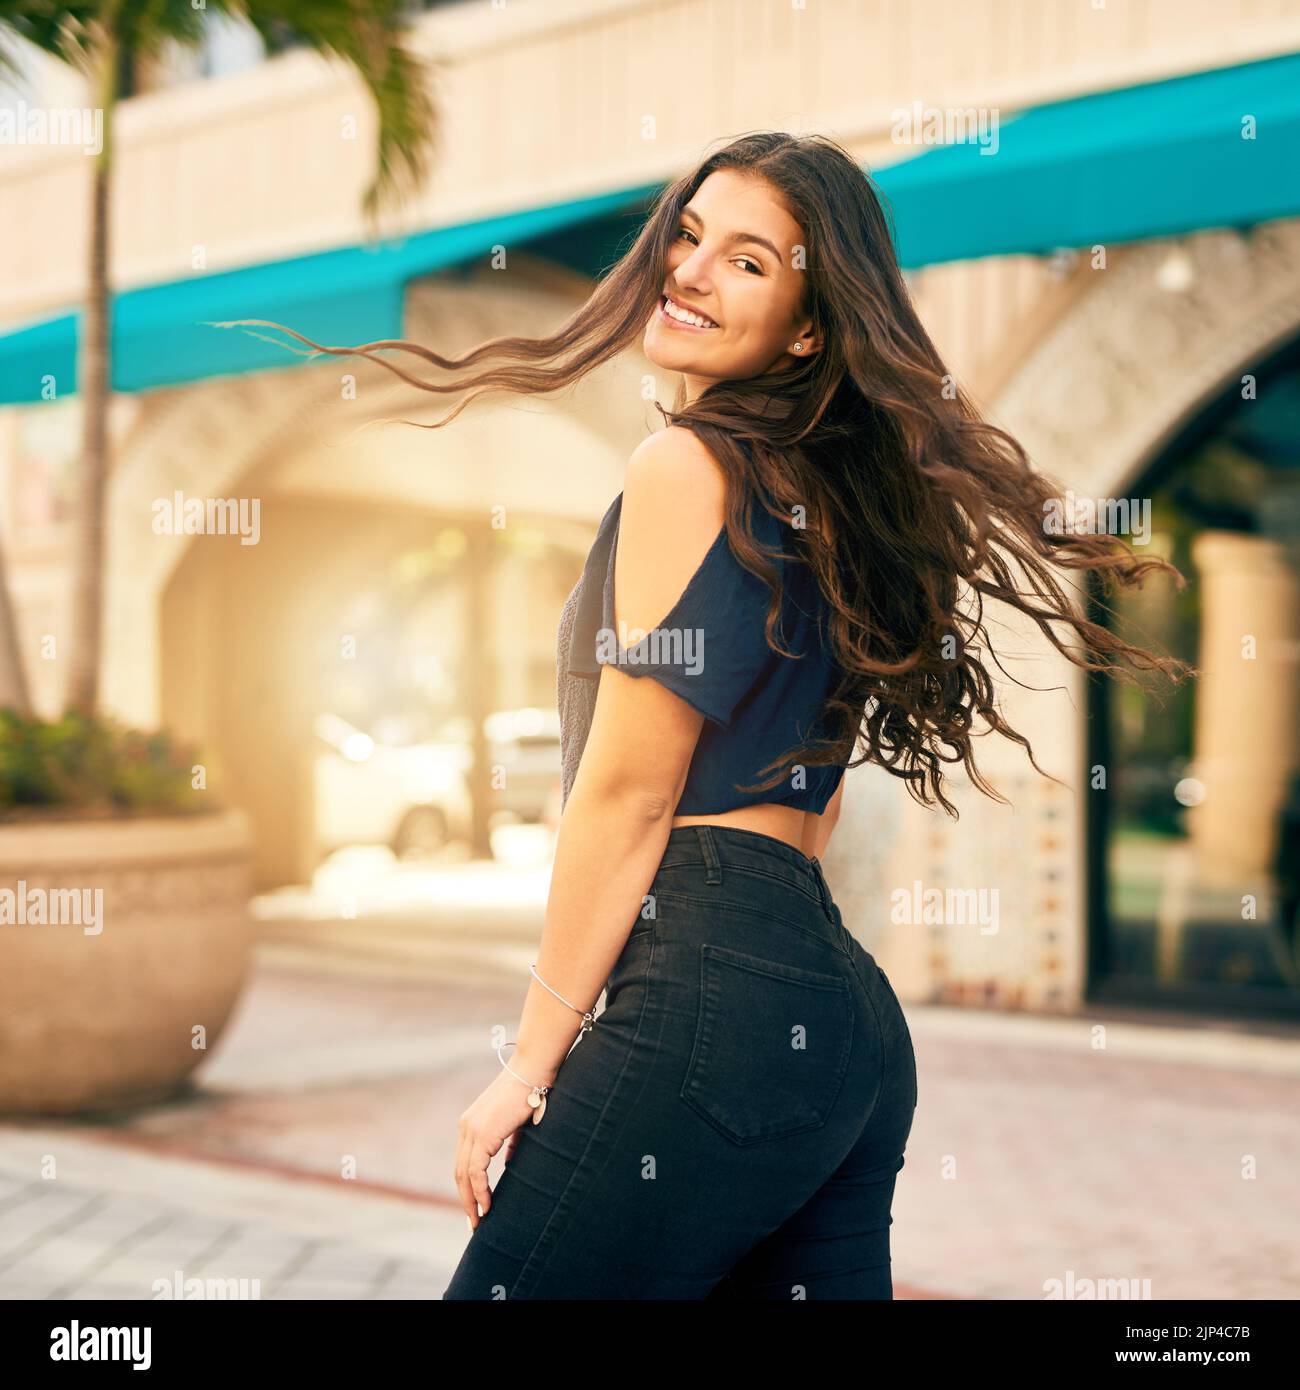 Celebrating life just by being happy. a happy teenage girl in the city. Stock Photo